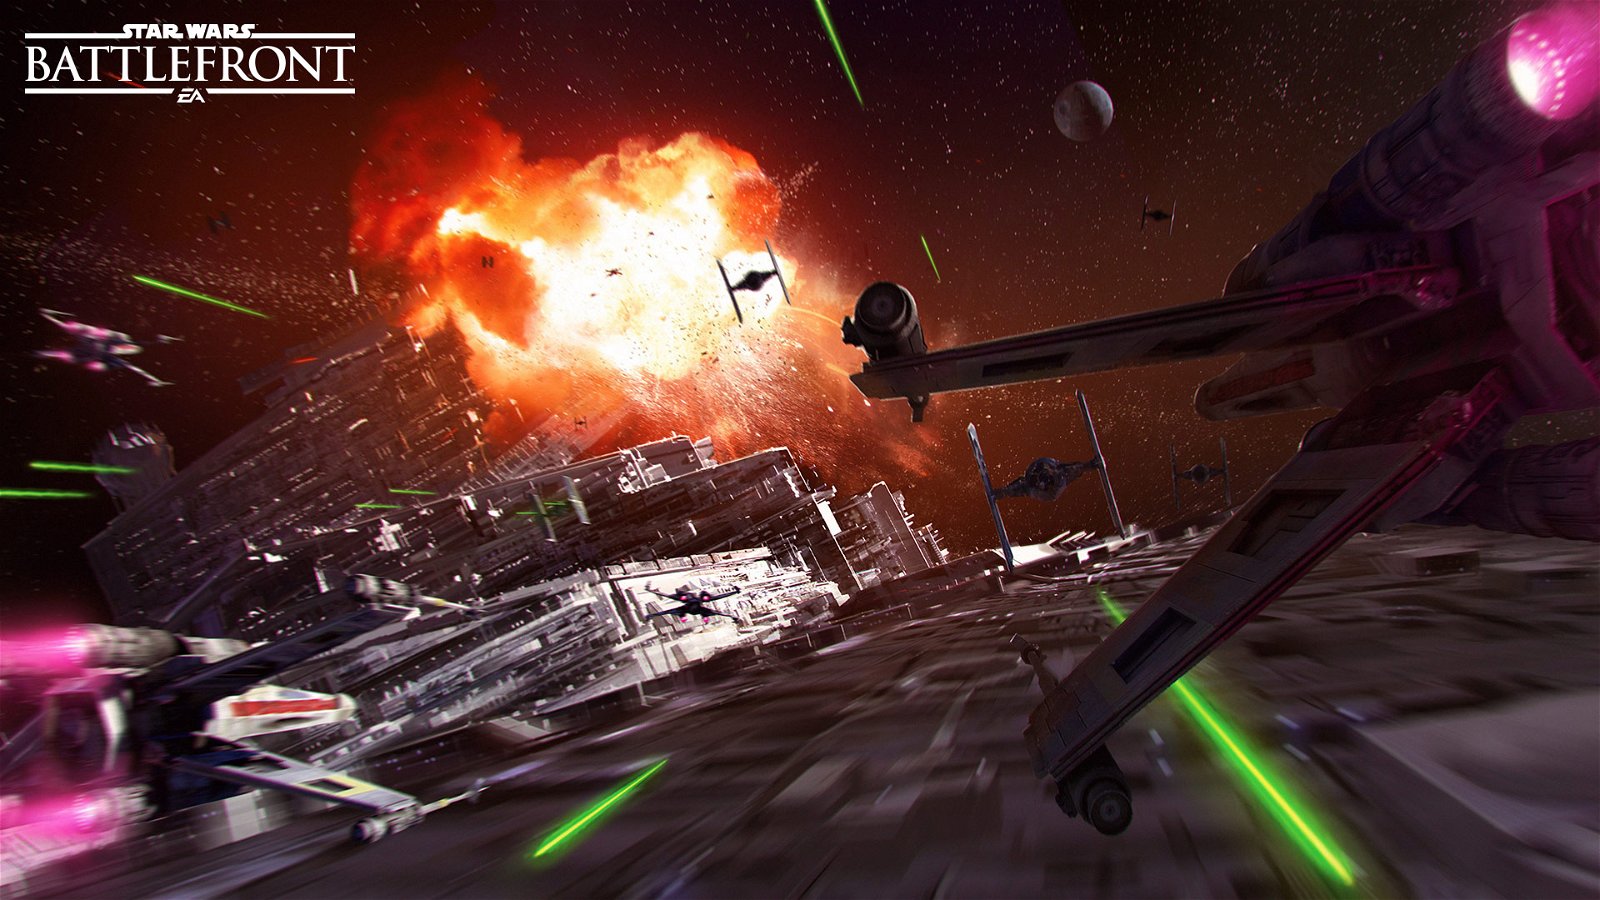 Star Wars Battlefront Adds New Game Mode In Next Expansion